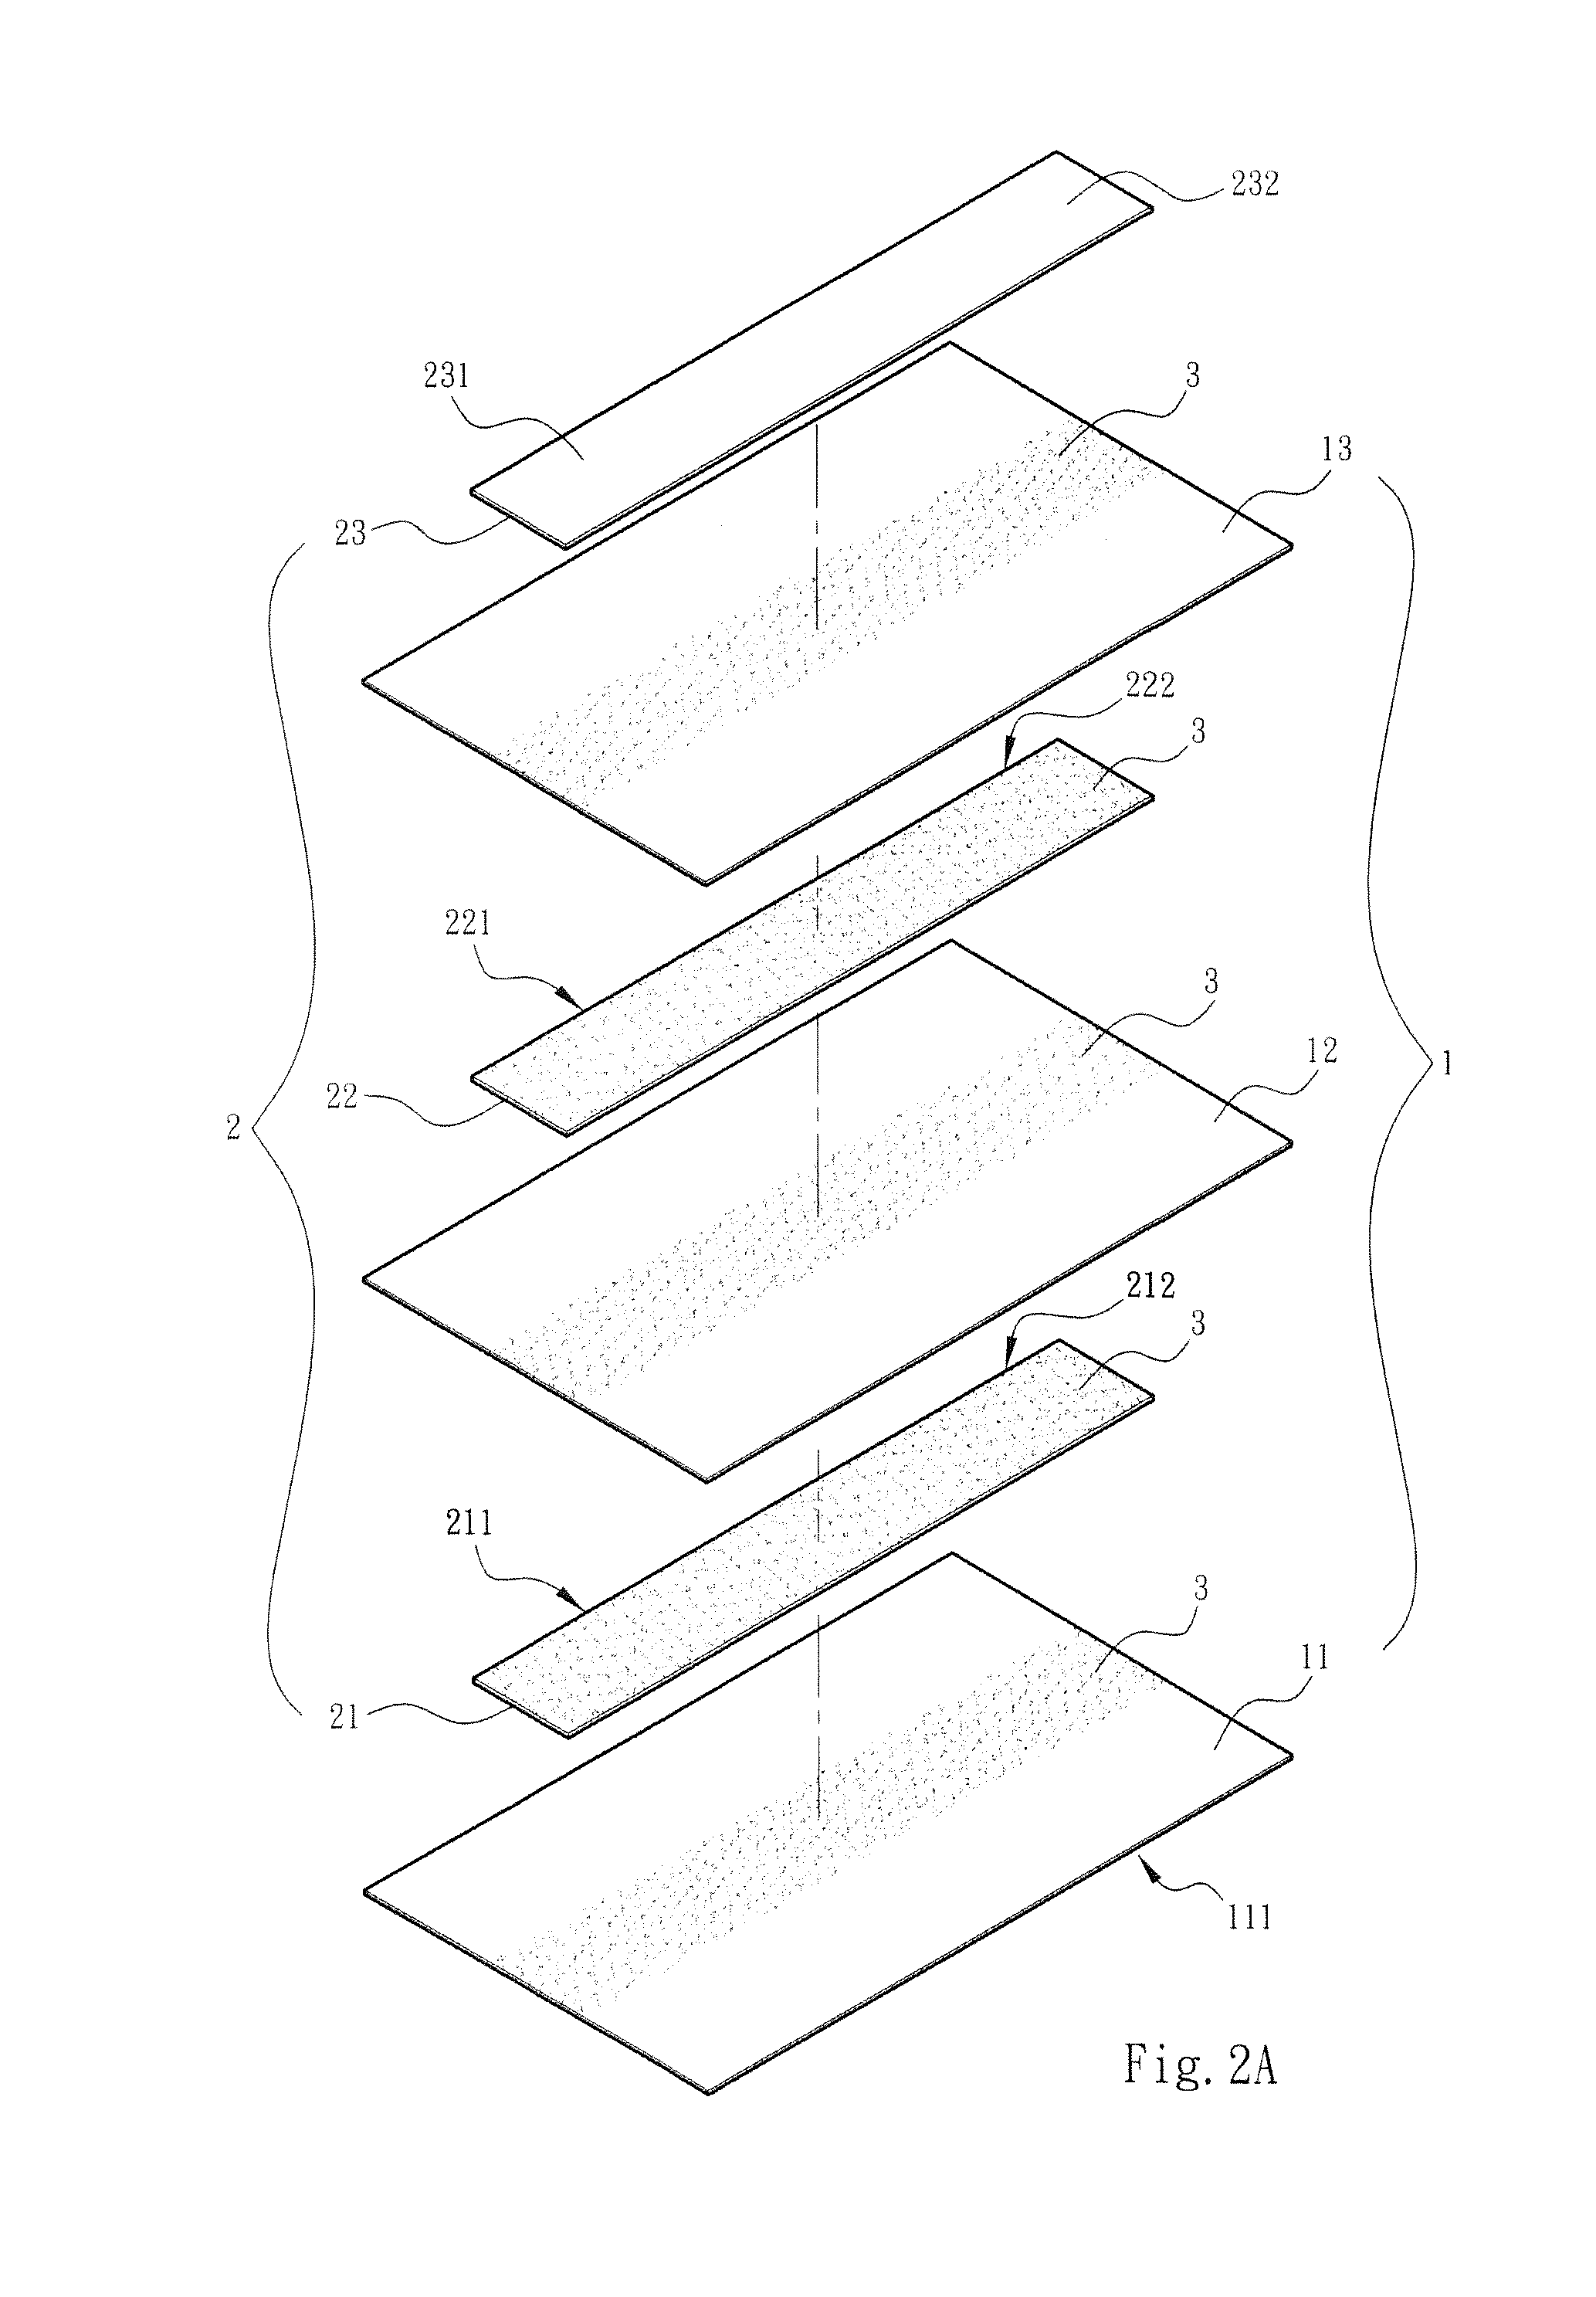 Complex heat dissipation assembly